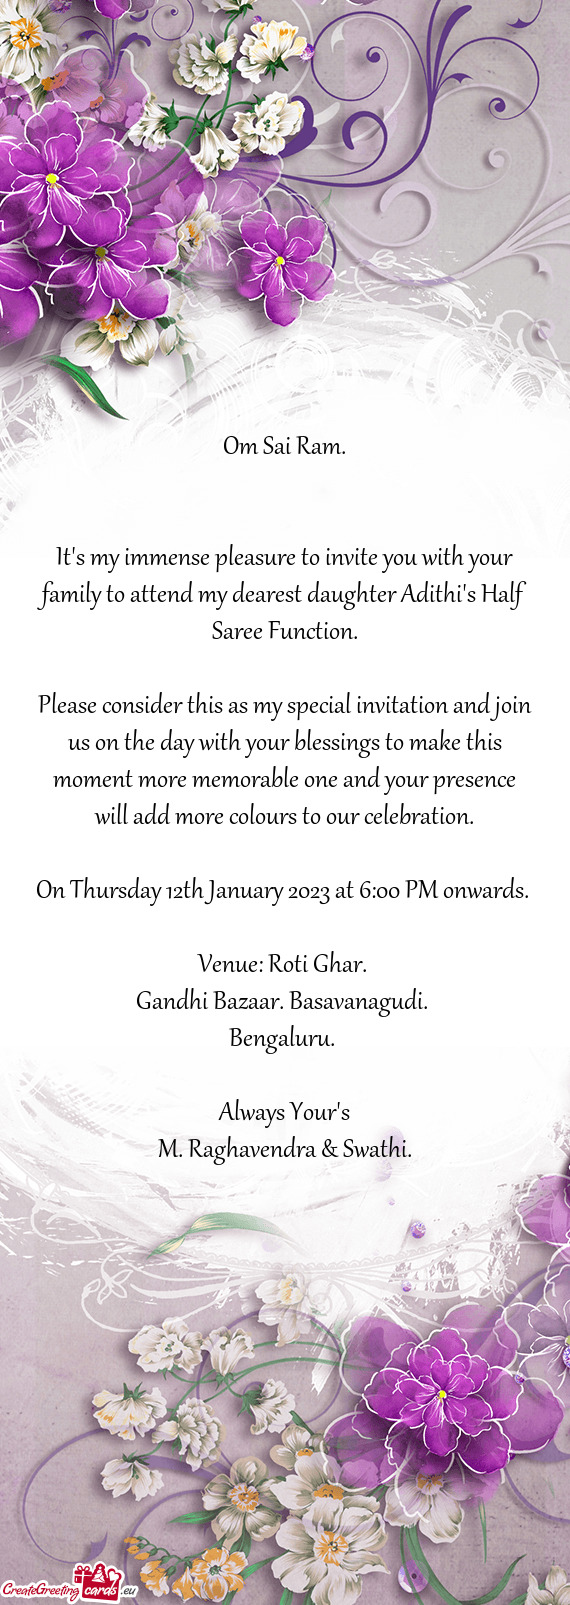 On Thursday 12th January 2023 at 6:00 PM onwards